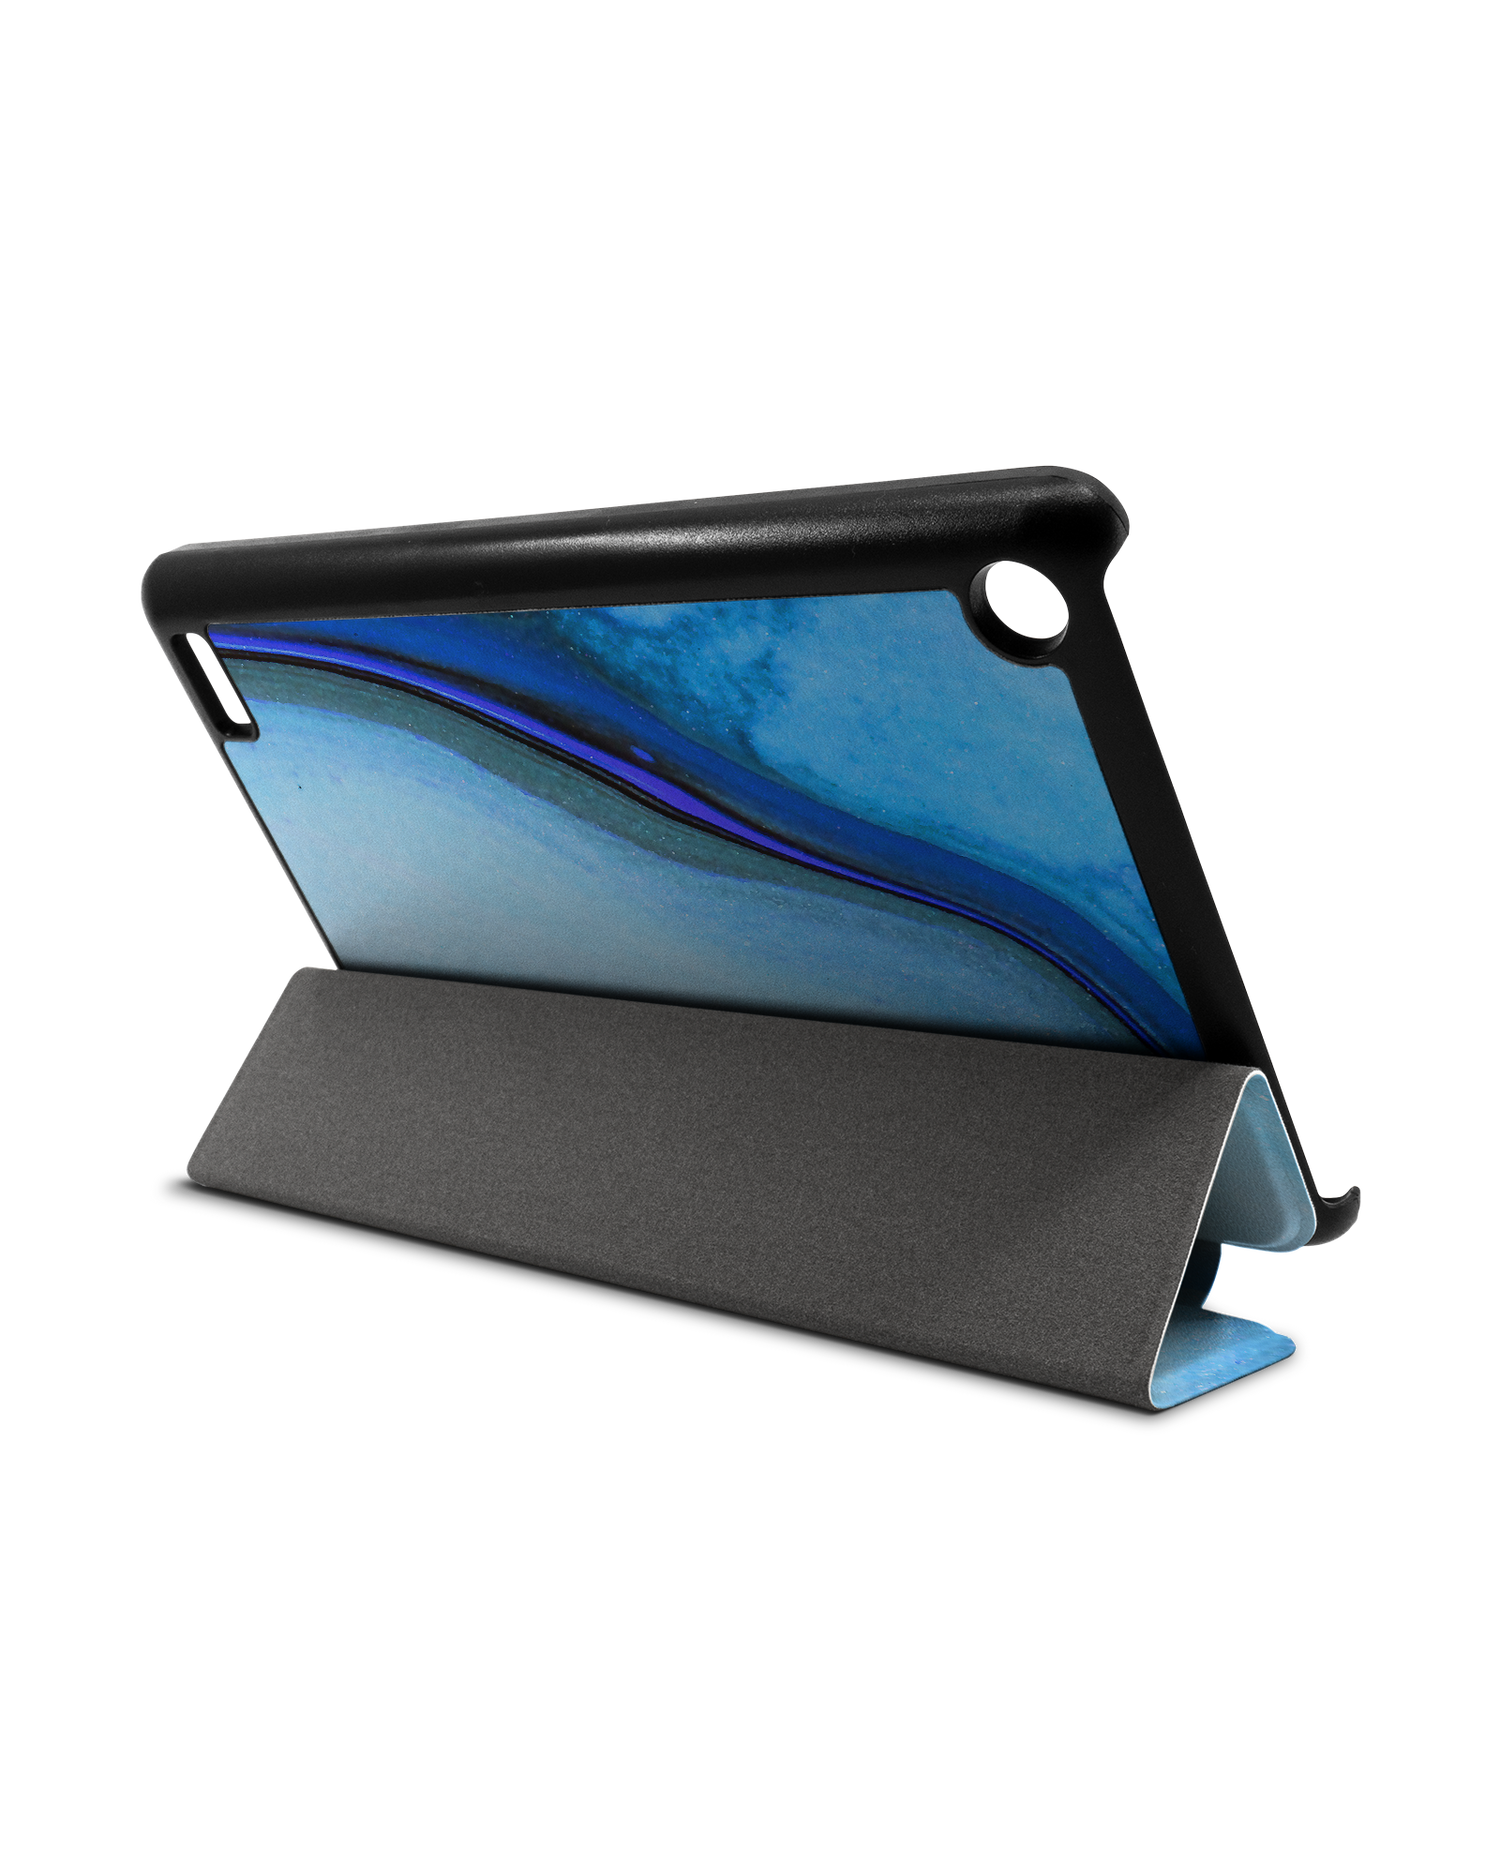 Cool Blues Tablet Smart Case for Amazon Fire 7: Used as Stand